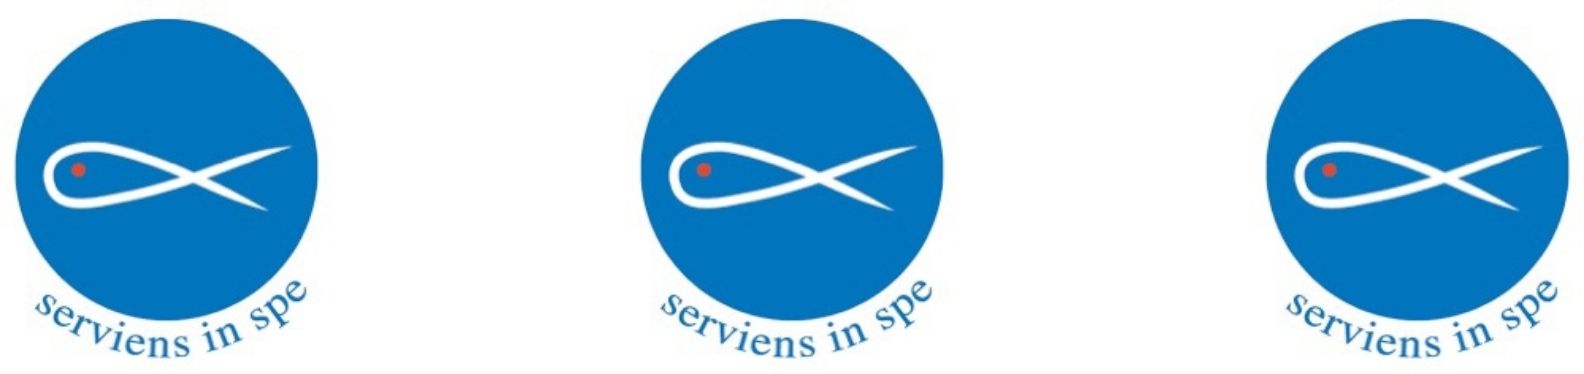 Banner of St. Vincent De Paul Logo of a fish in white on a blue circular background with their motto "Serviens in Spe" under the fish.